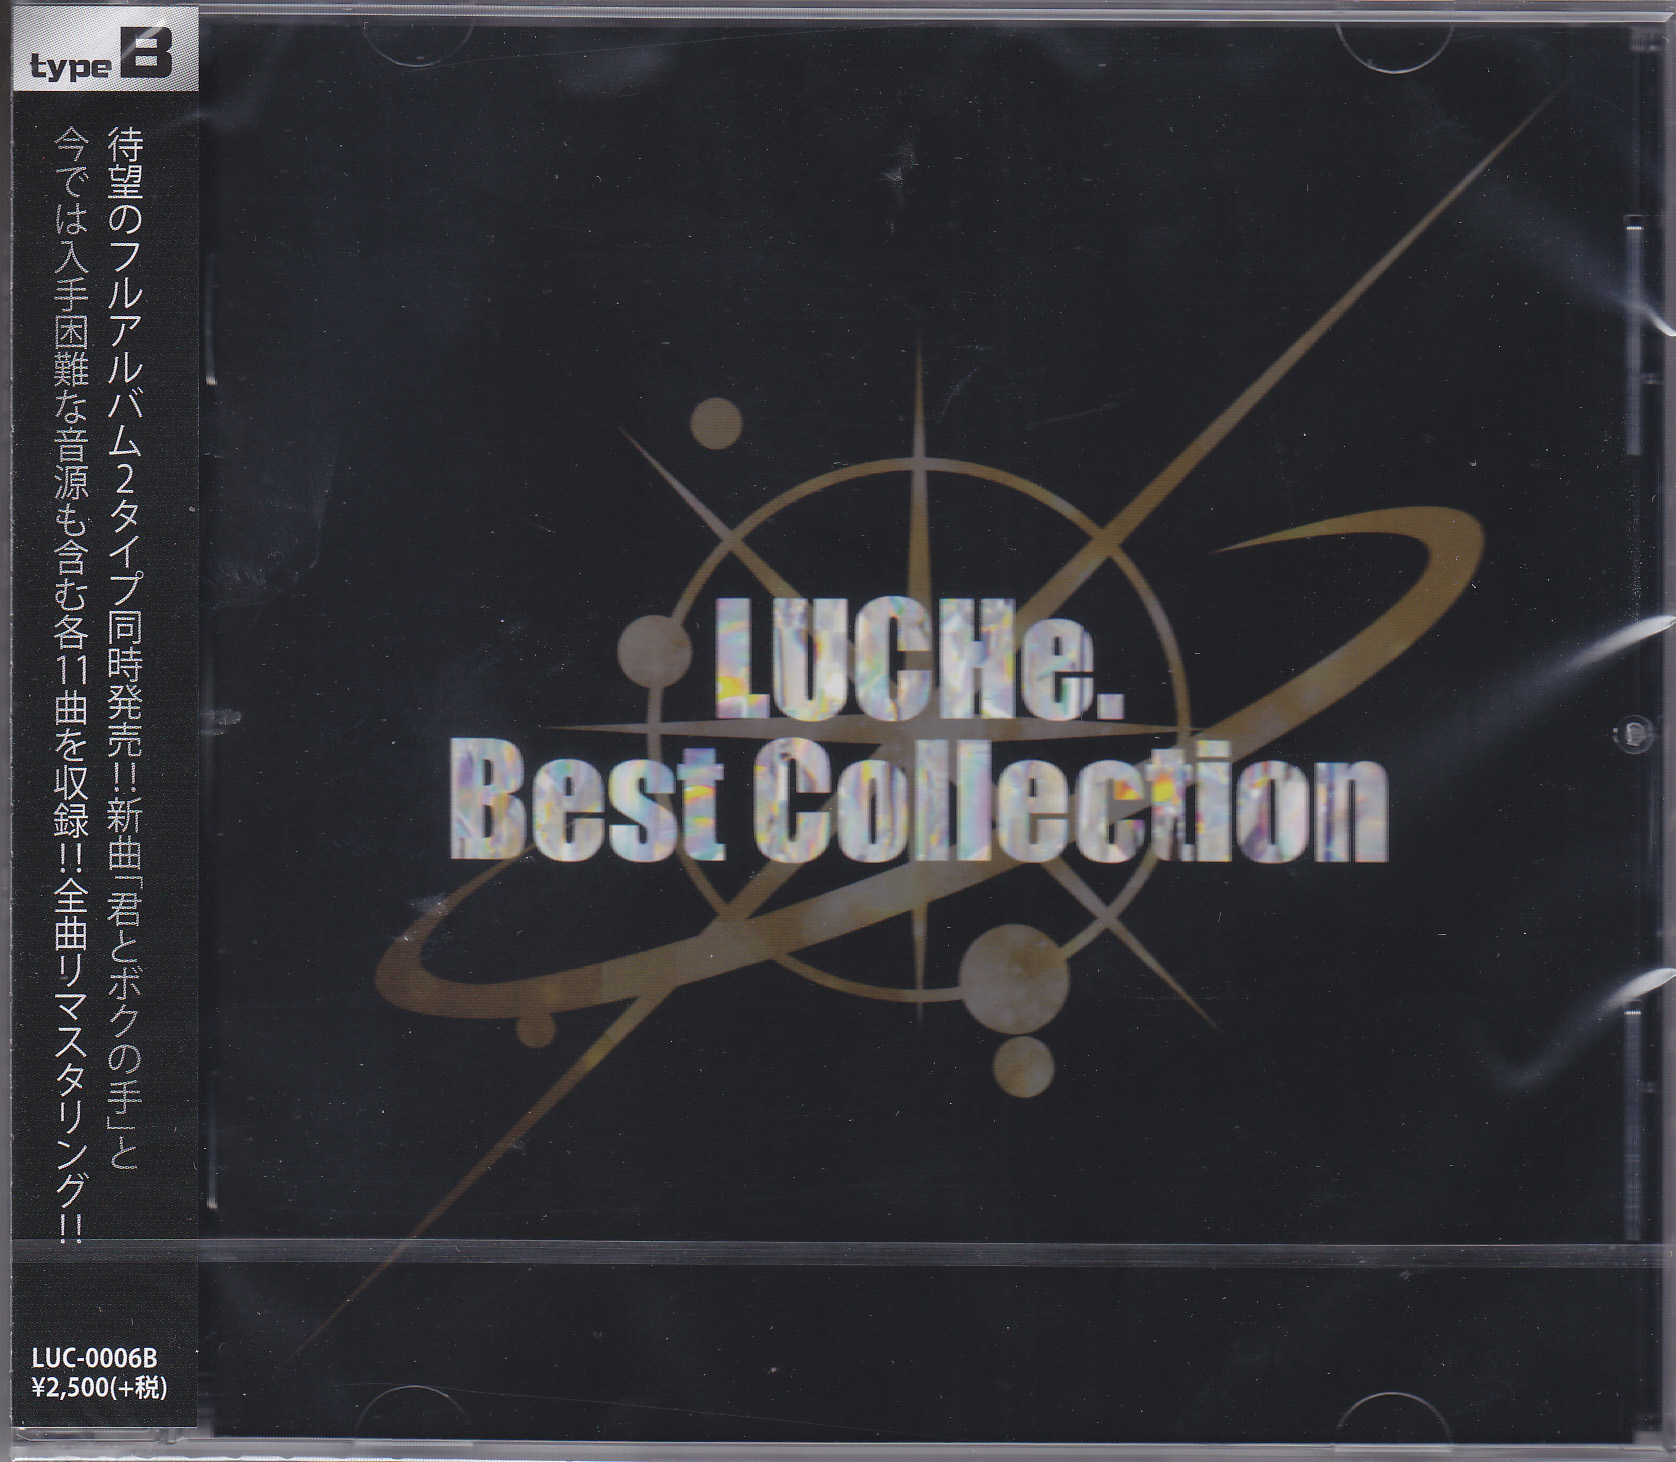 LUCHe. の CD LUCHe. Best Collection【Btype】